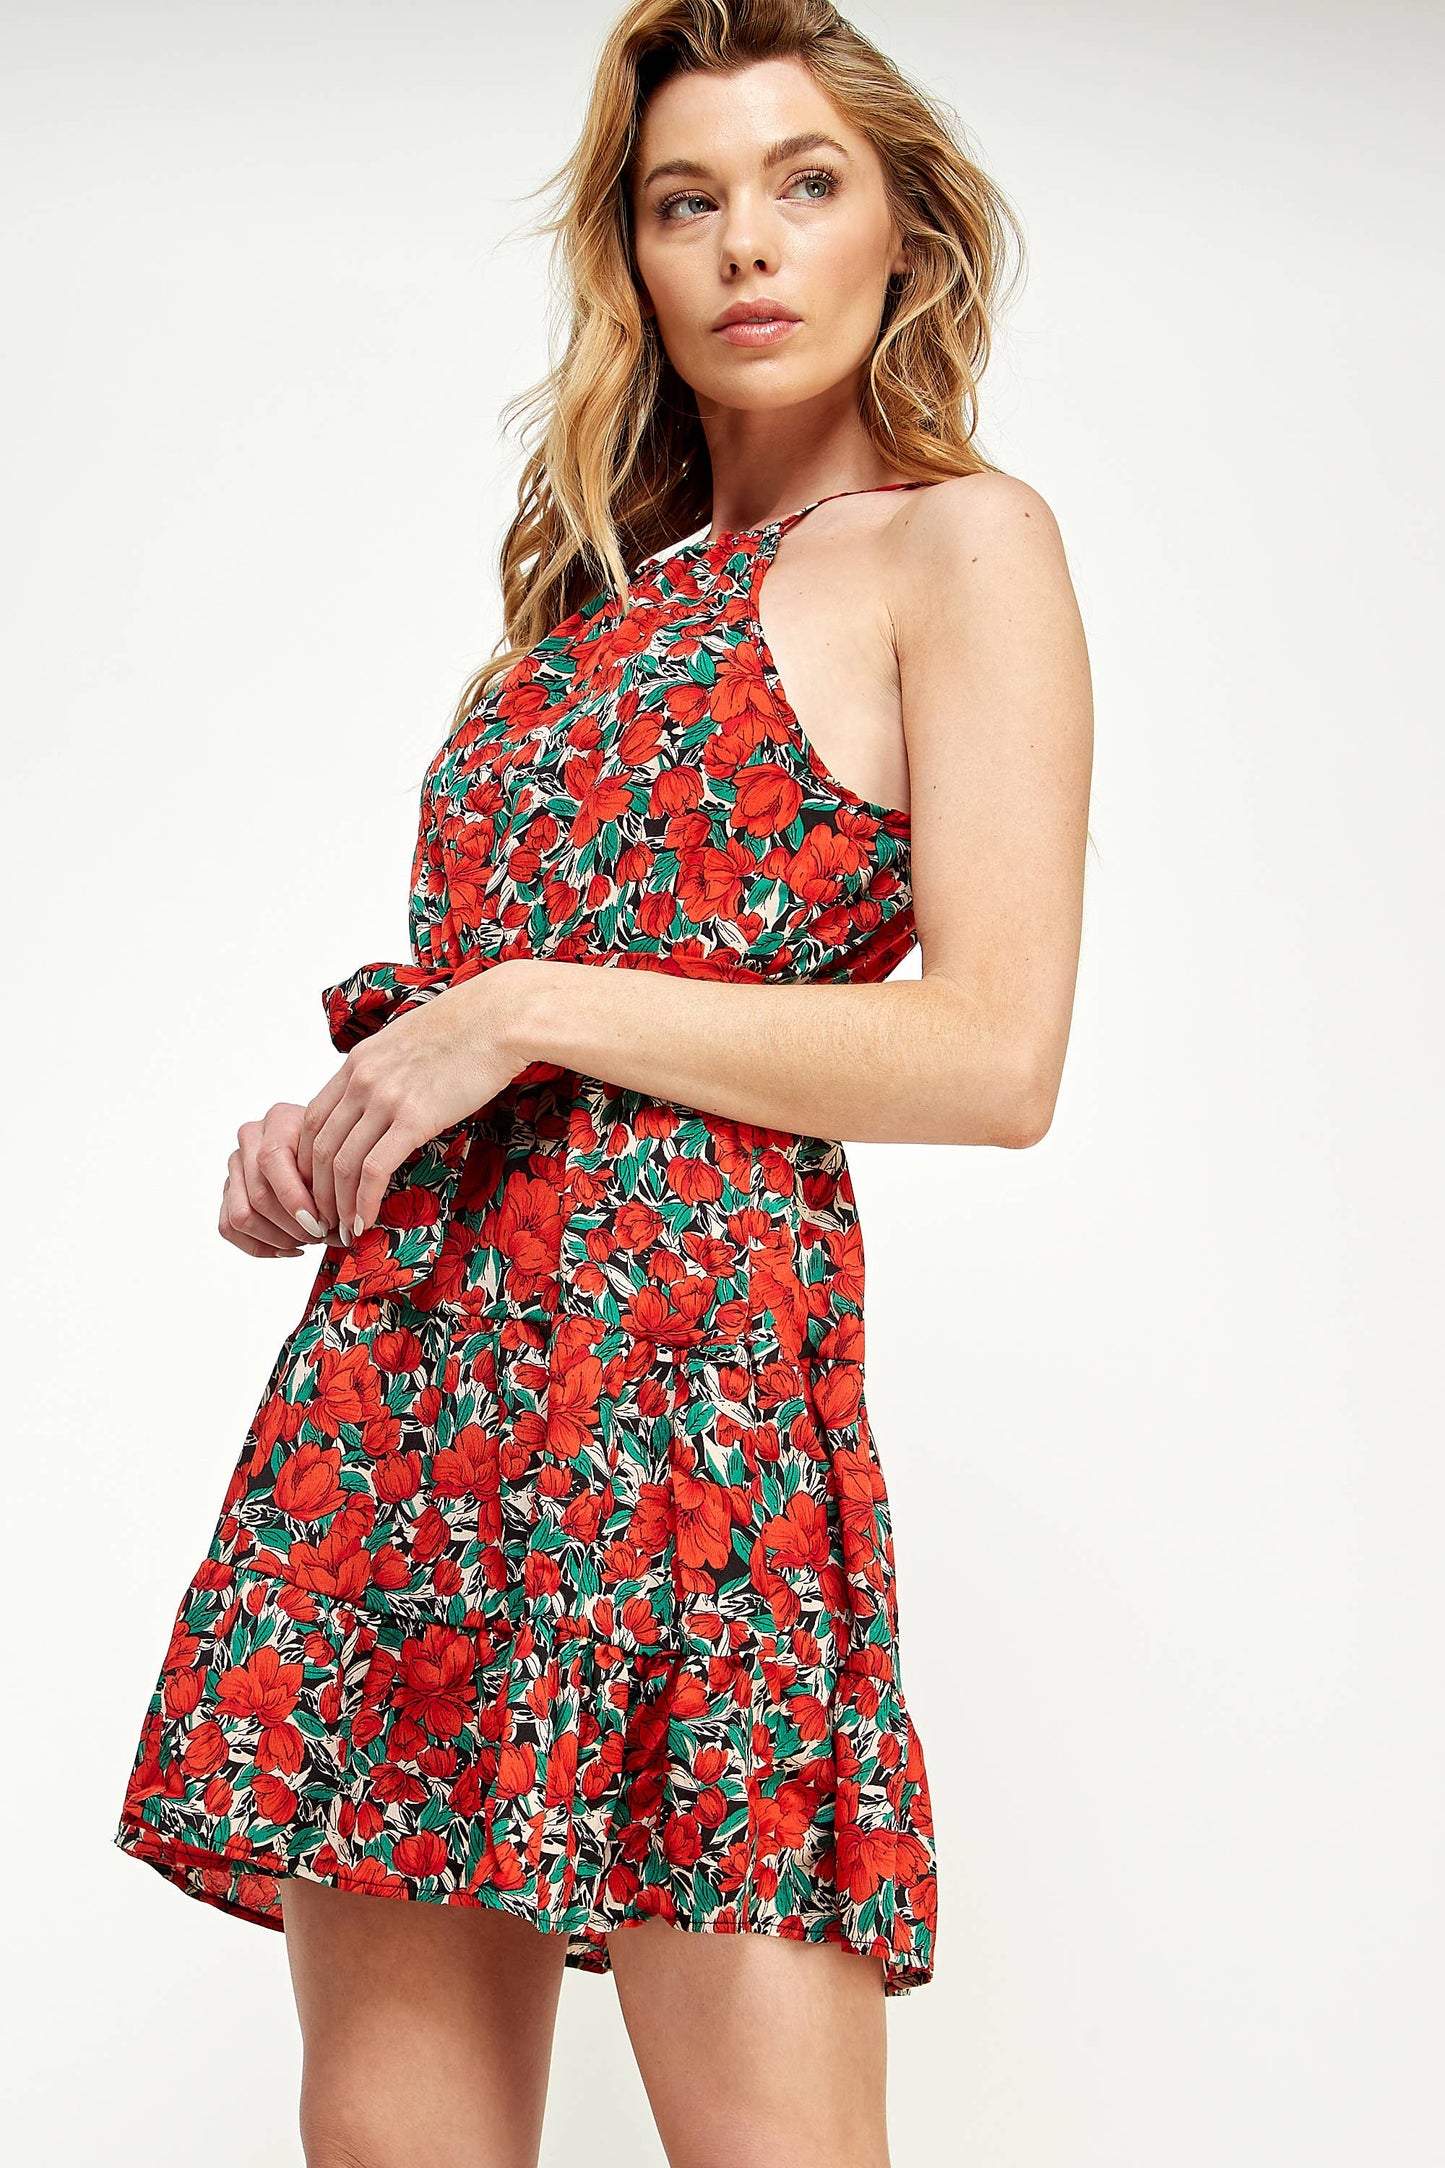 Winsome Apparel - WOVEN FLORAL TIE WAIST HALTER DRESS: SMALL / PURPLE